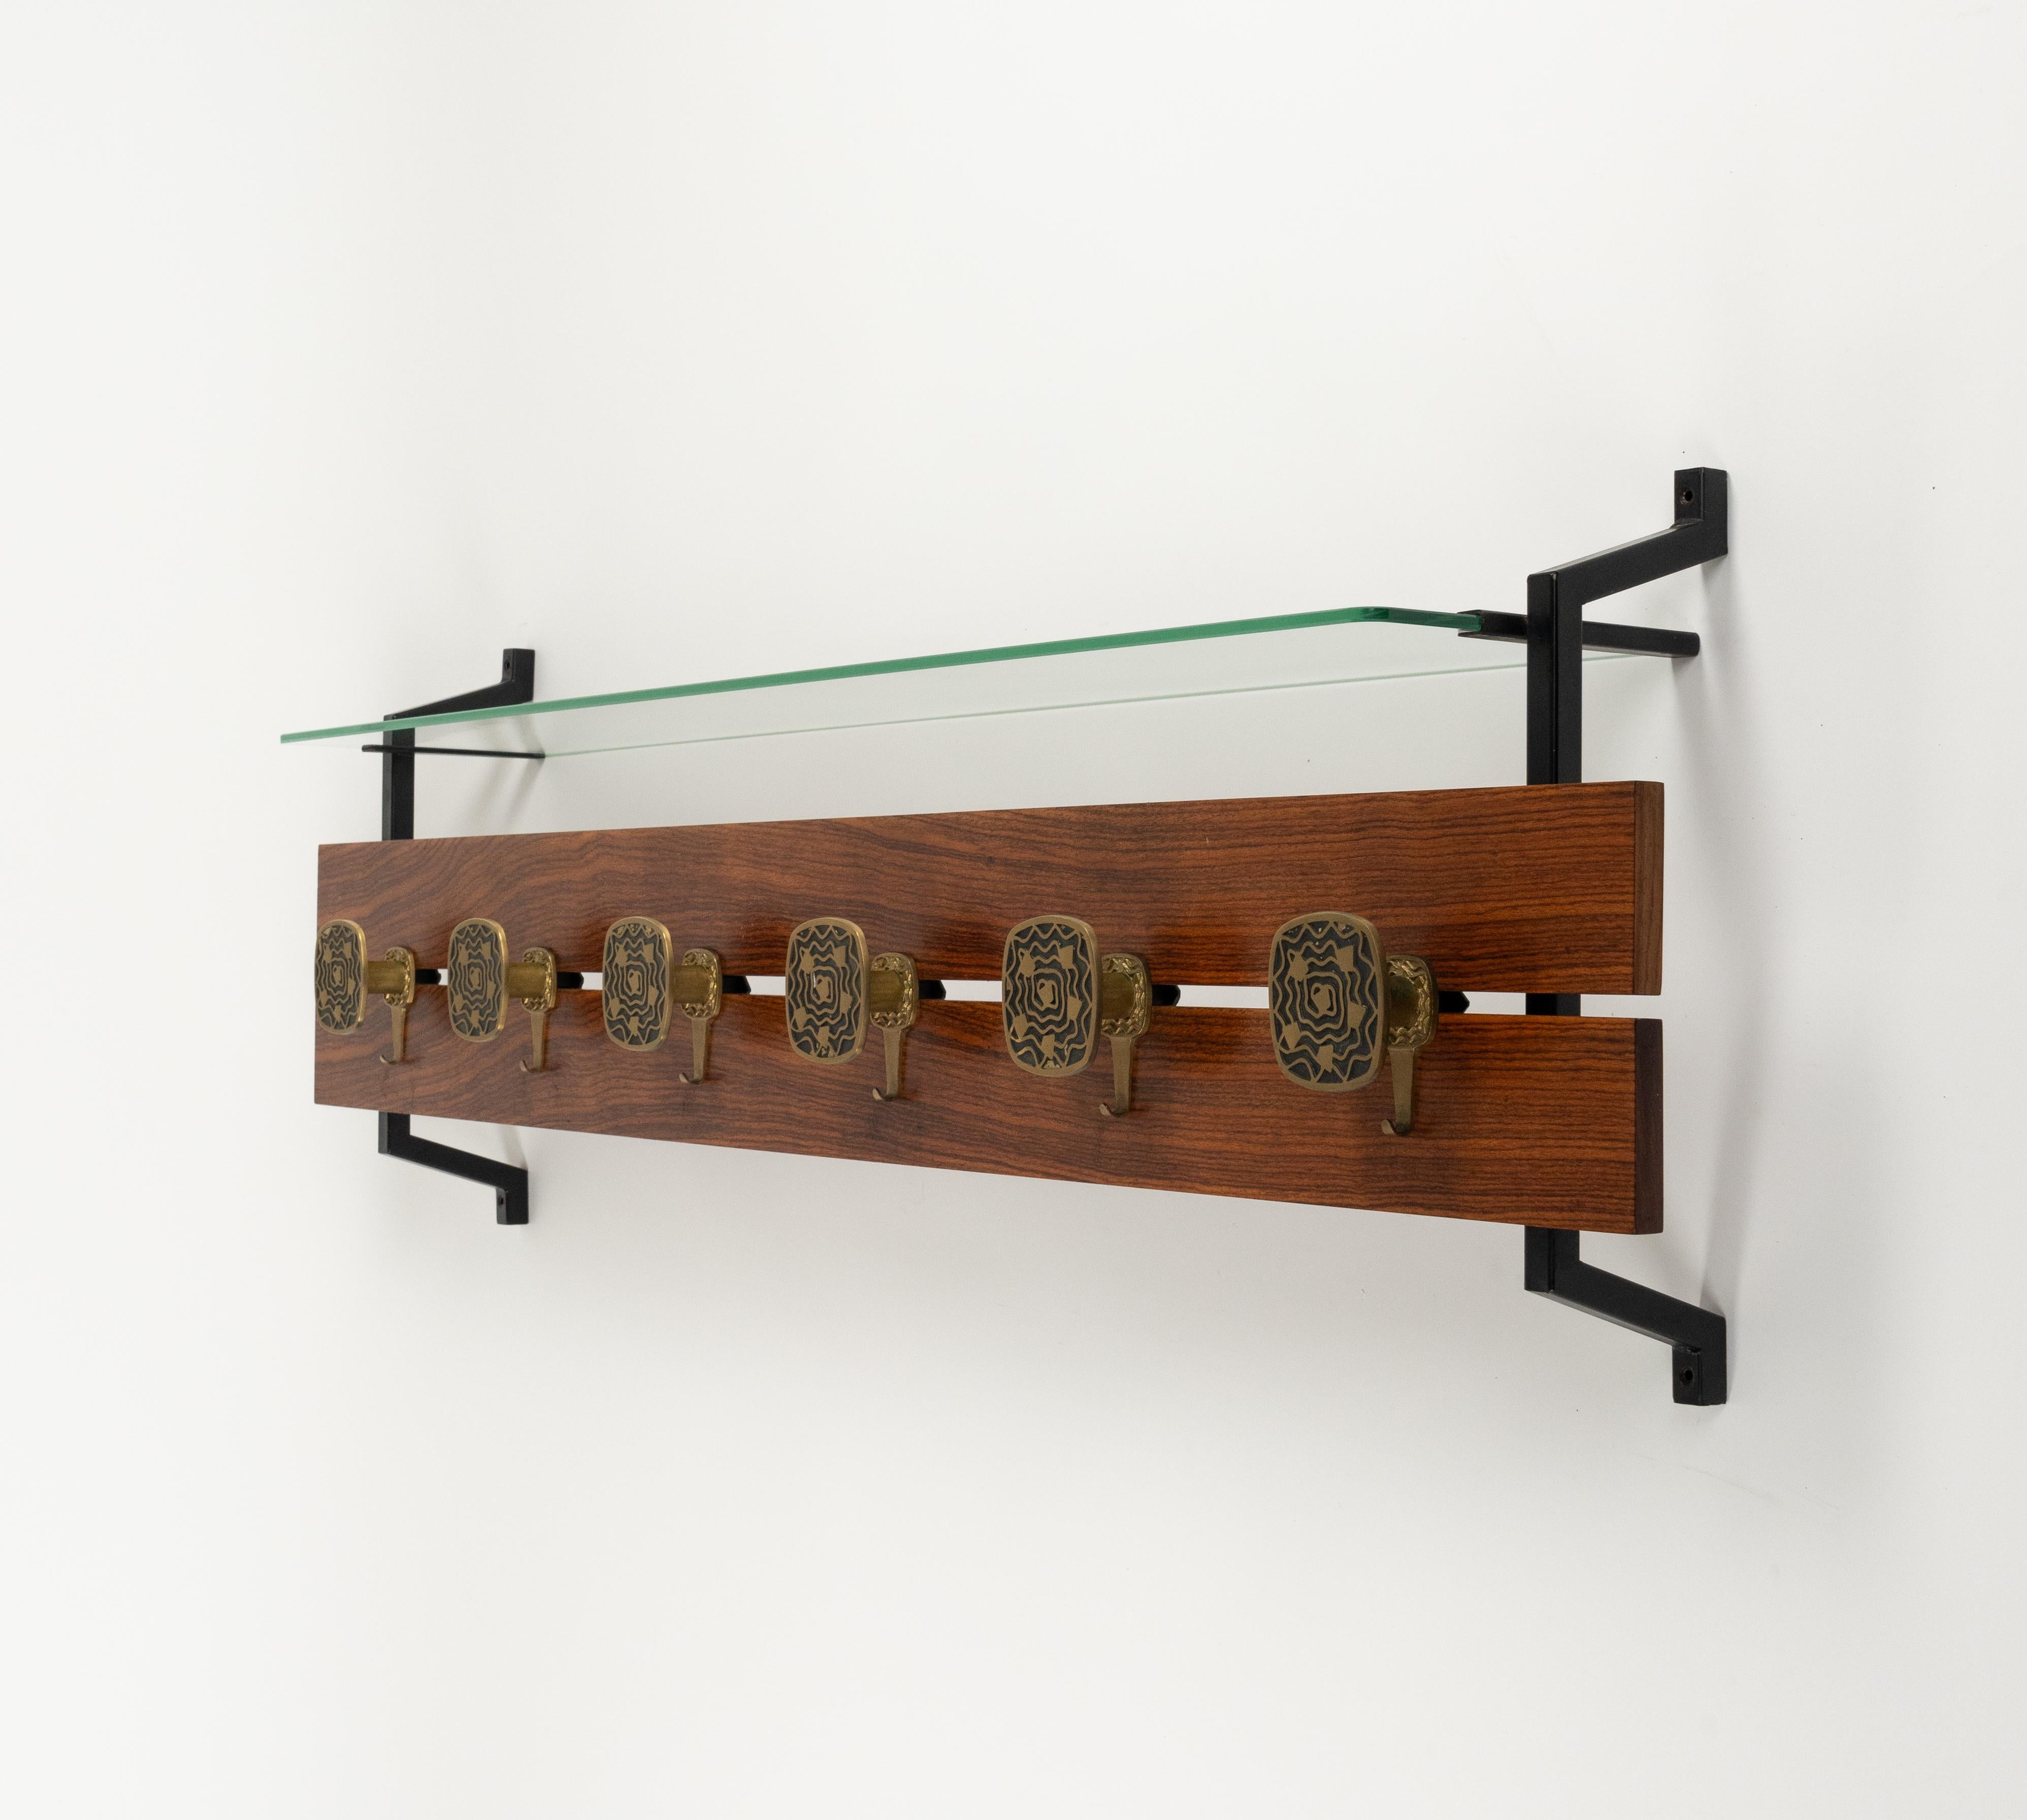 Midcentury Wood, Glass and Brass Coat Rack Herta Baller Style, Italy 1970s For Sale 5